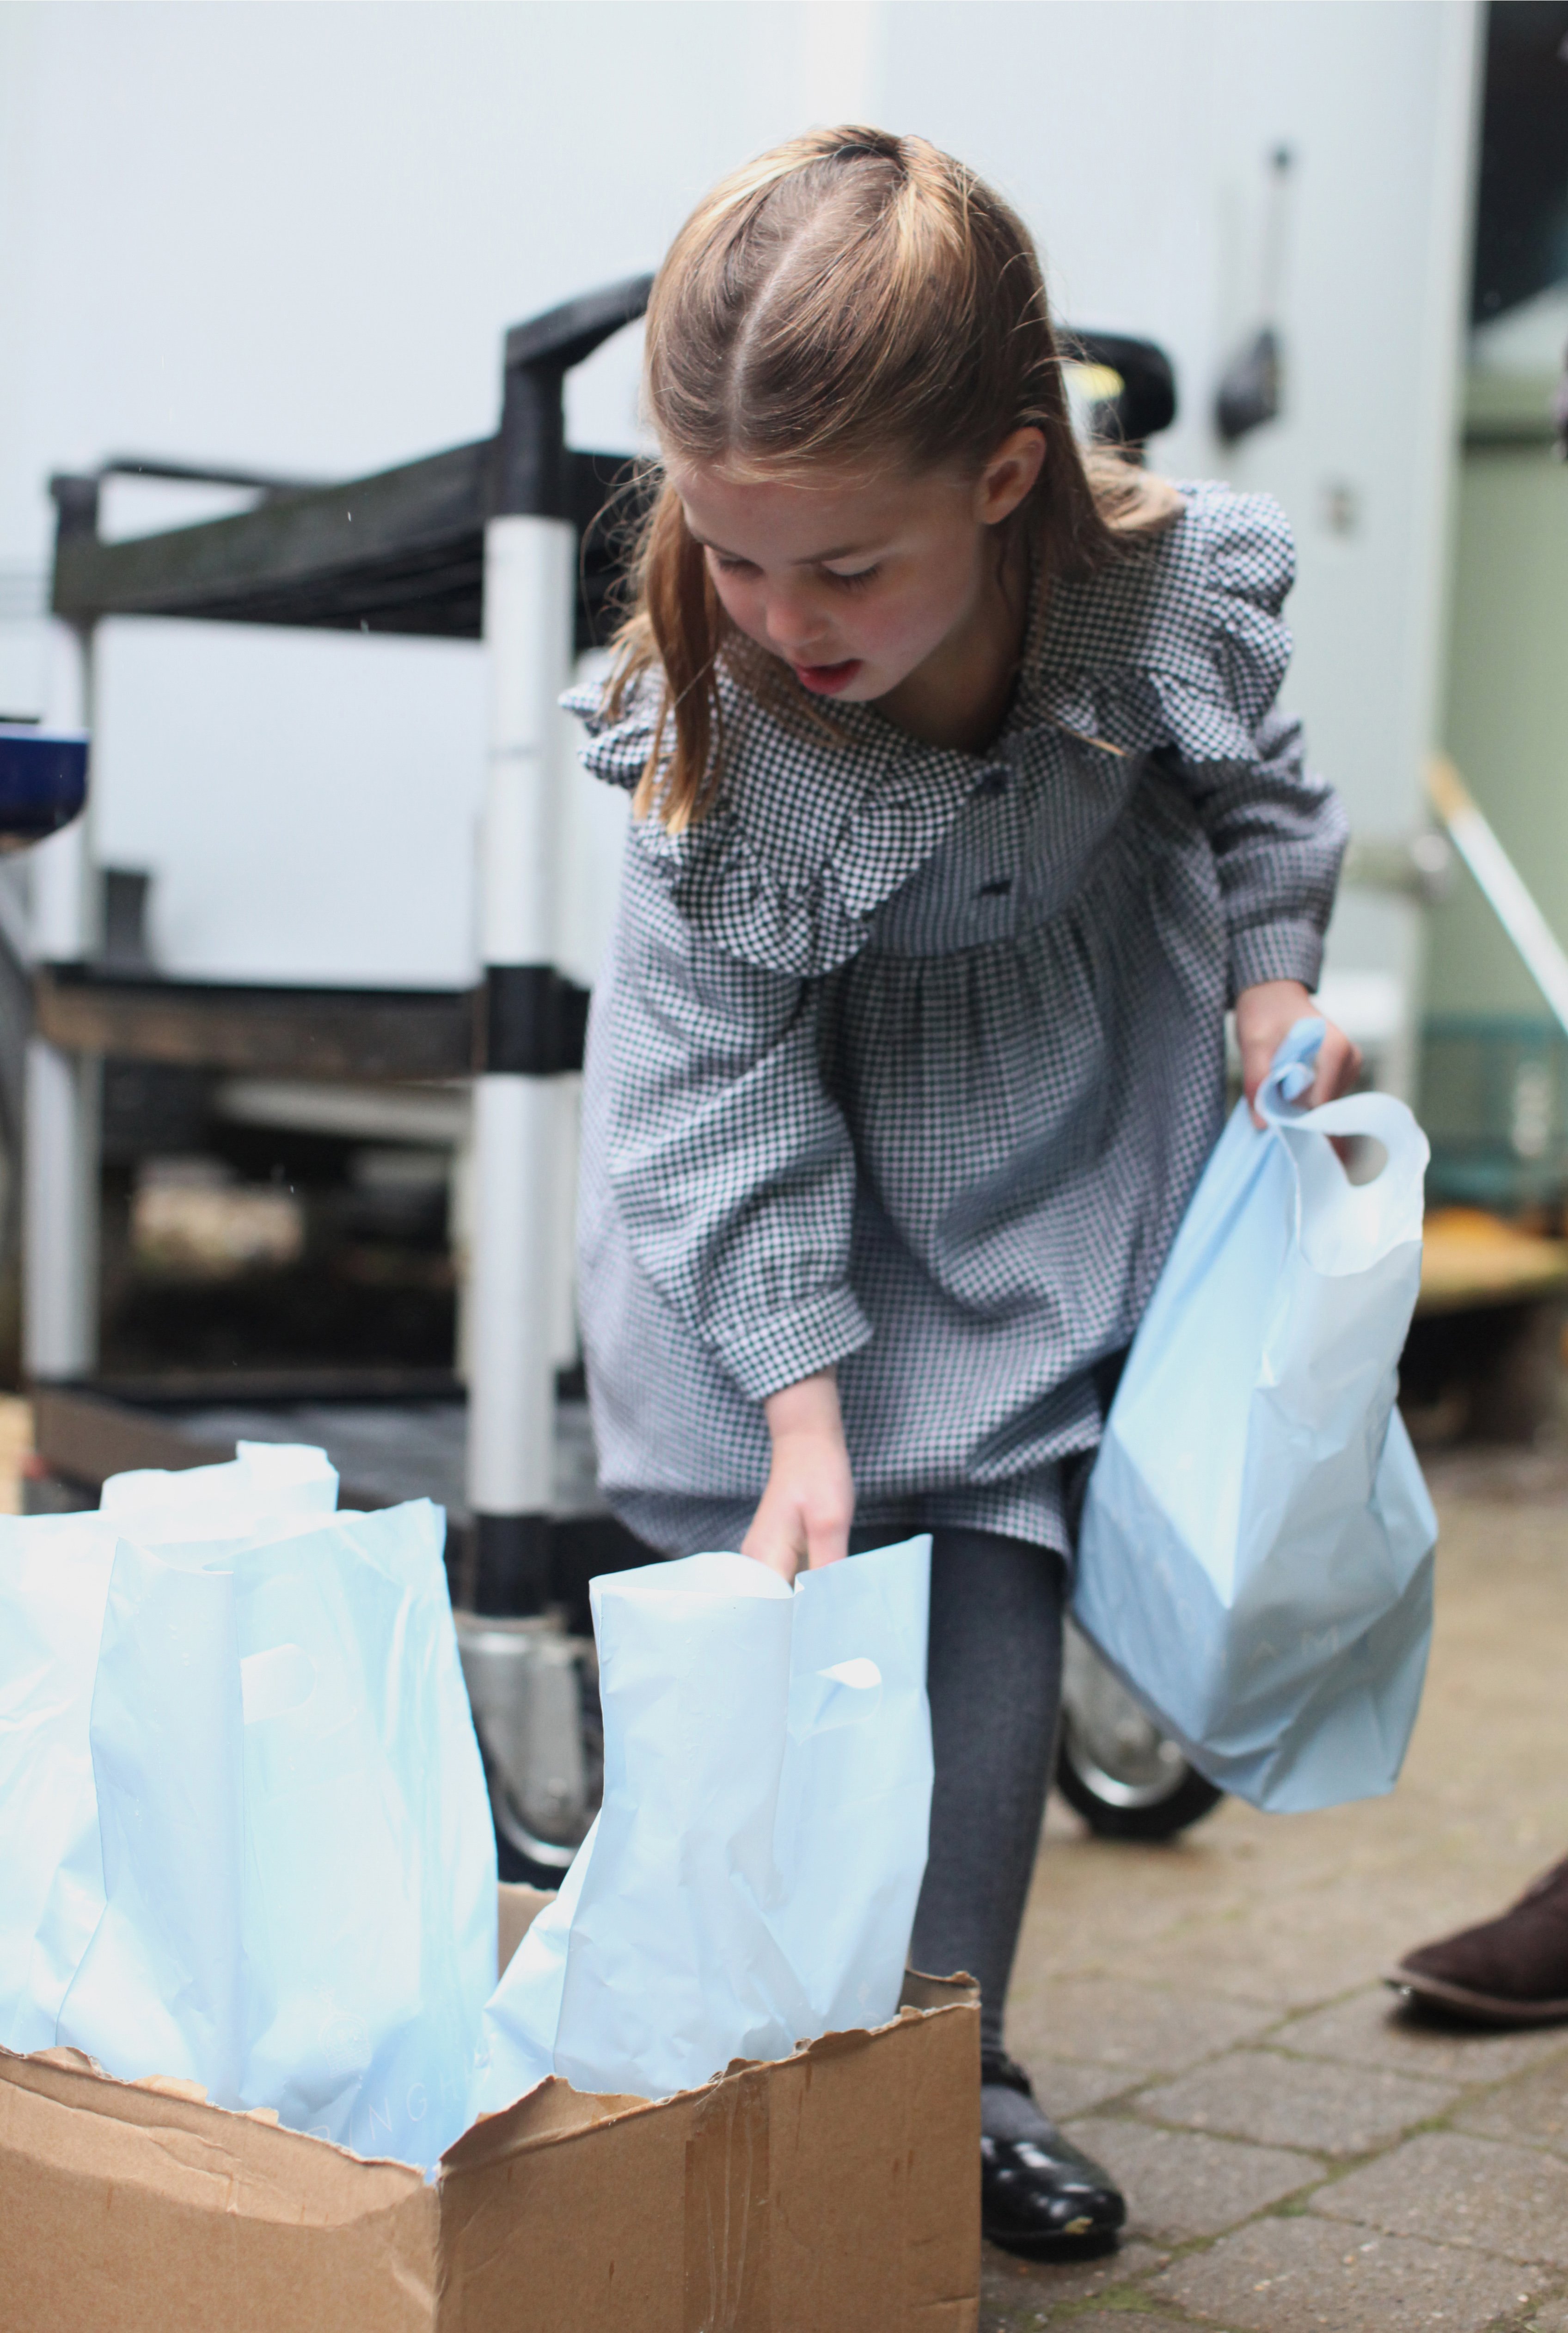 Princess Charlotte photographed picking up packages. | Source: Getty Images